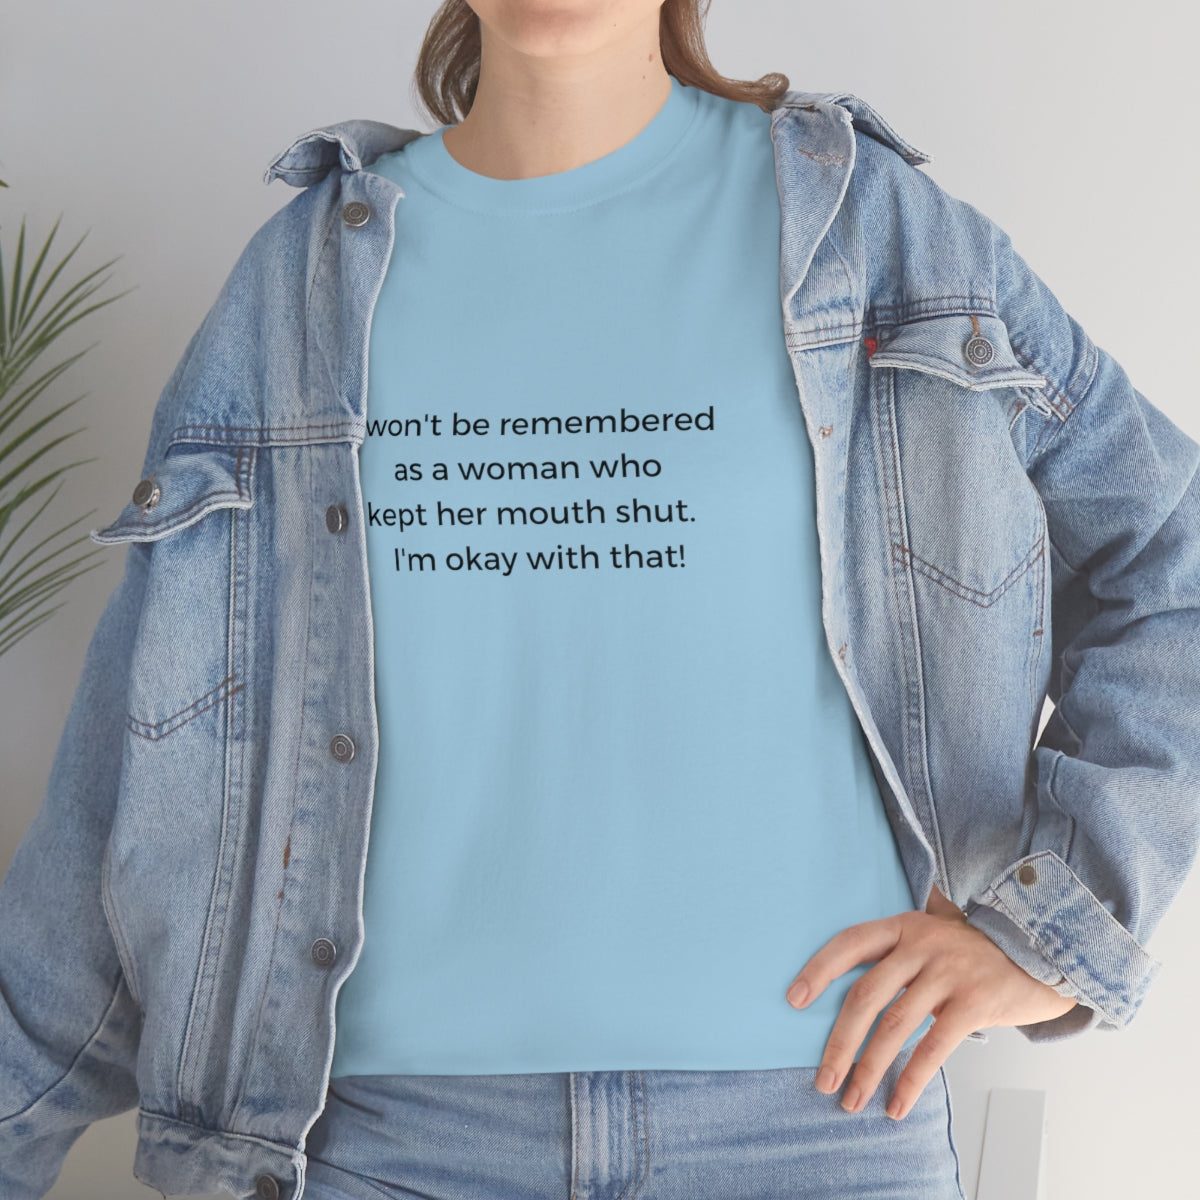 Funny Feminist Shirt, I Won't Be Remembered As A Woman Who Kept Her Mouth Shut, Wonder Woman, Pioneer Woman,  Funny Tshirt, Funny Womens Tee - The Good Life Vibe